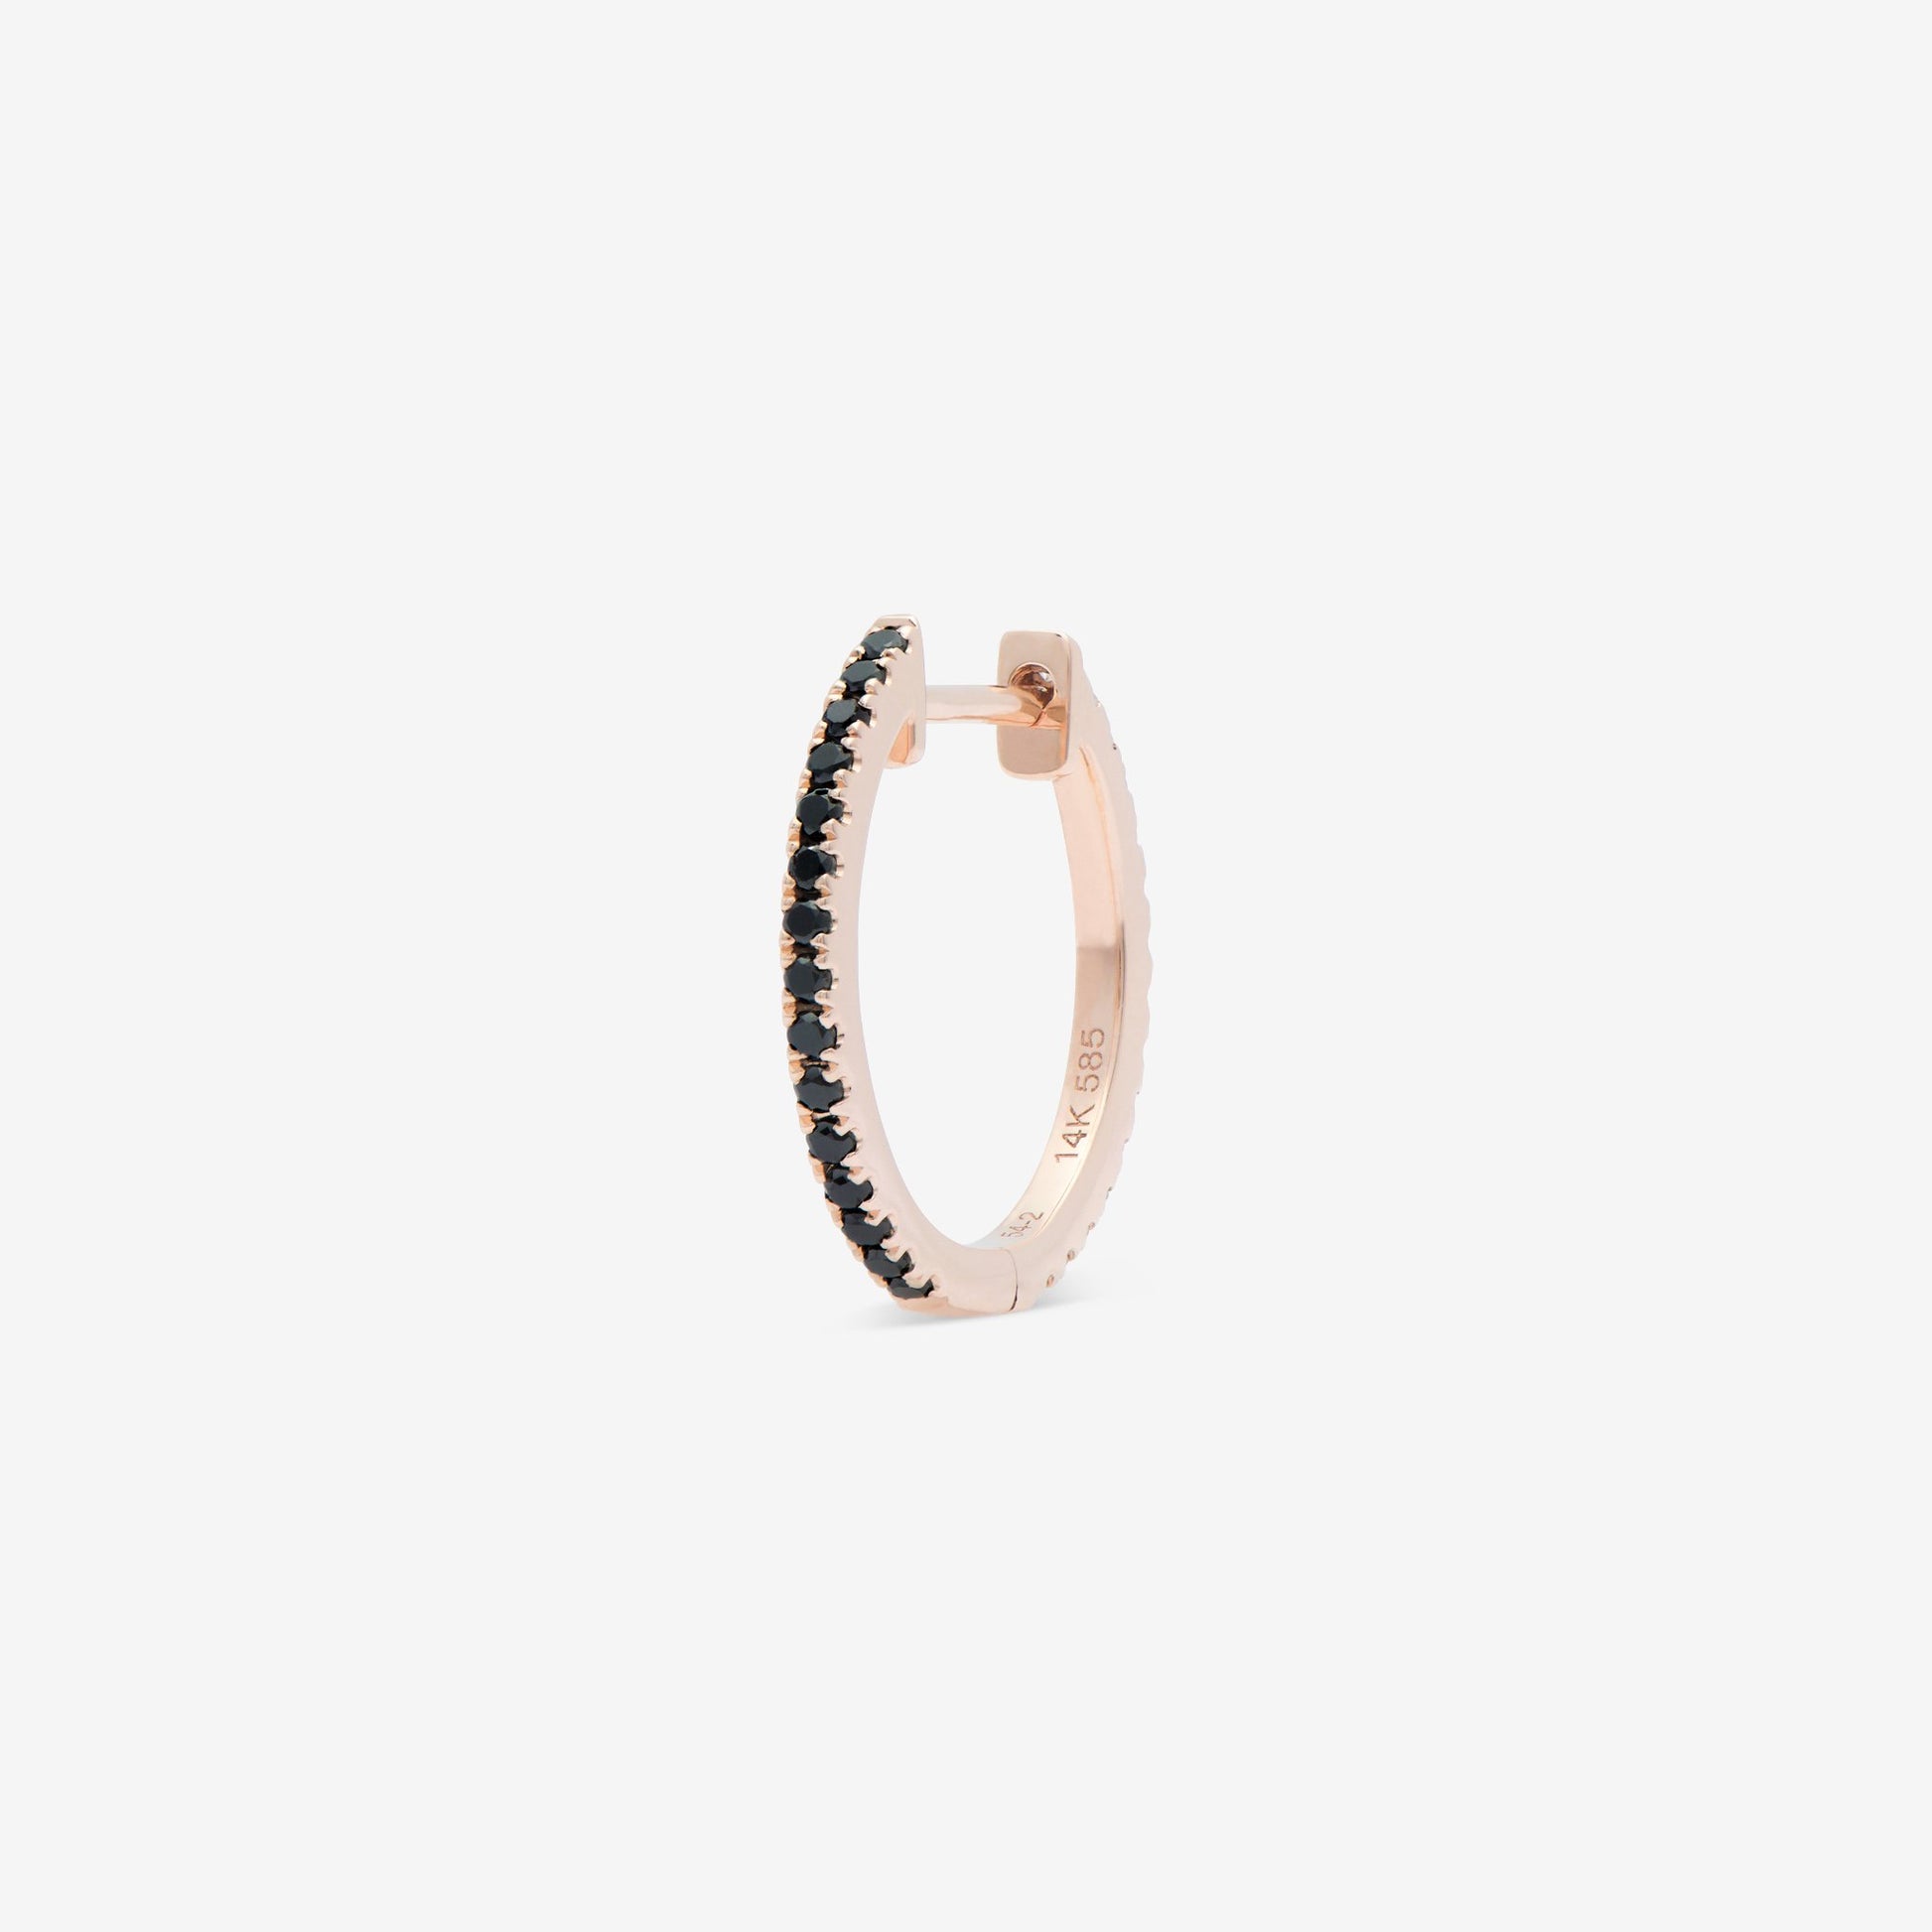 ENNUI Atelier 14mm hoop with black and white diamonds set in rose gold back